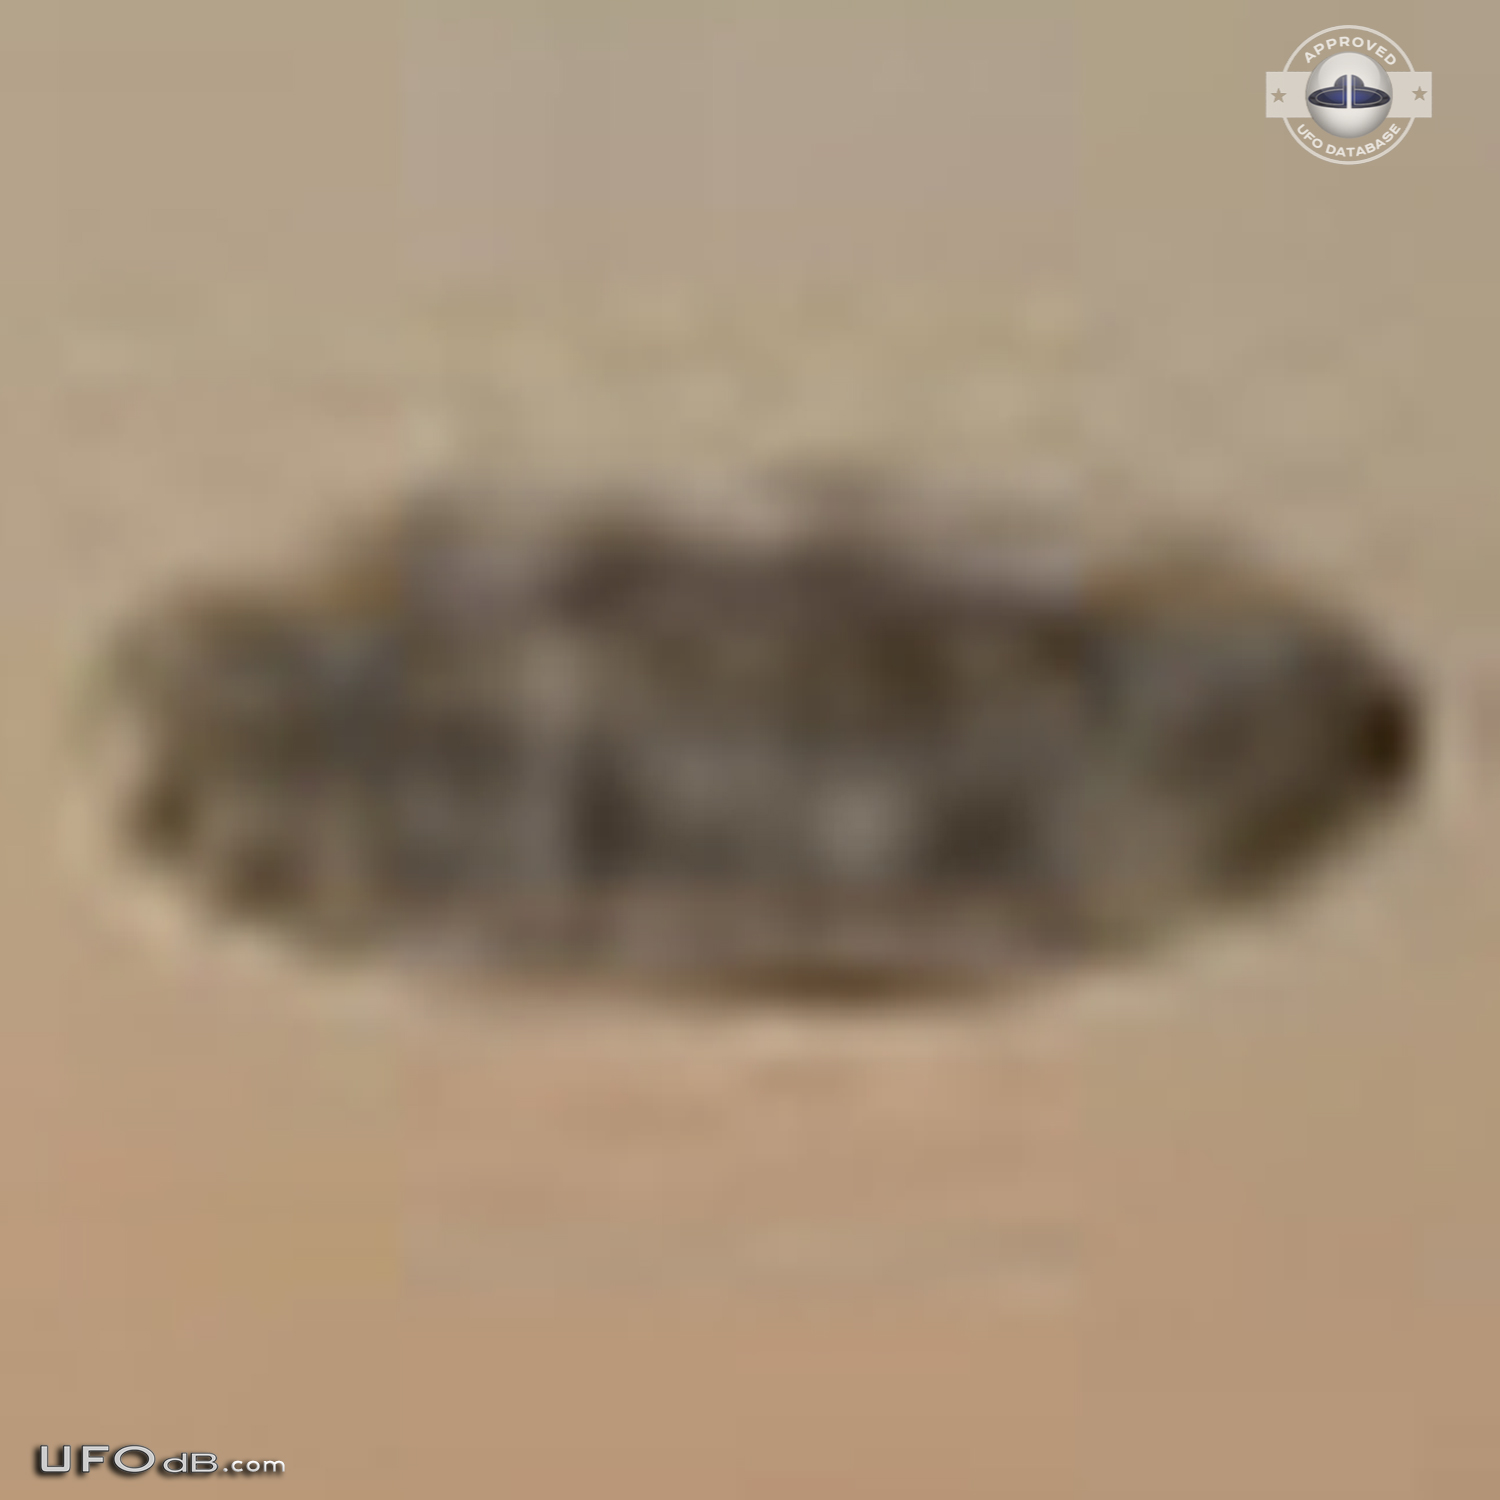 Dark shadowy disc UFO over the Mississippi New Orleans Louisiana 2012 UFO Picture #513-5